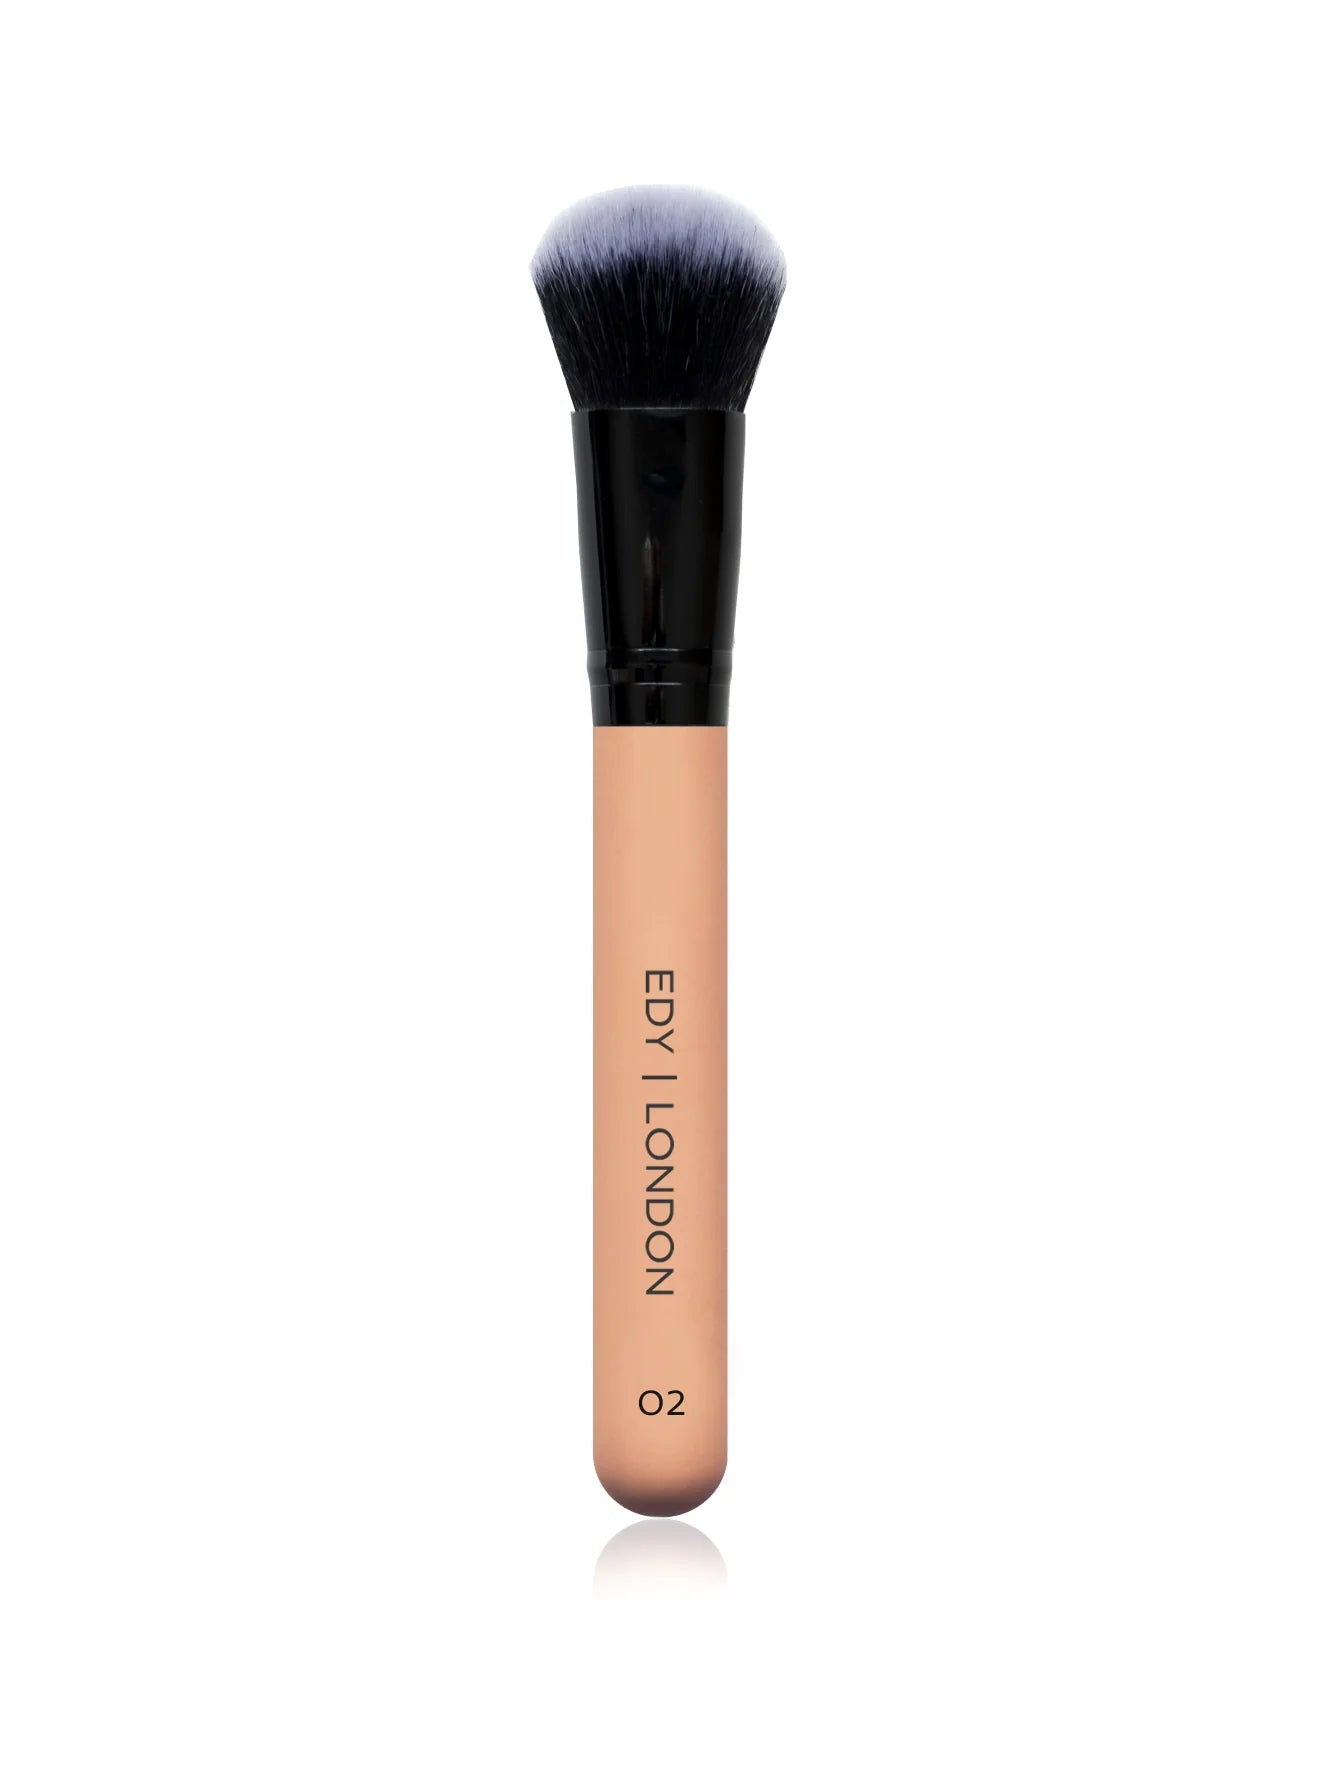 Contour and Sculpt Expert Face Brush 02 Make-up Brush EDY LONDON Pale Pink   - EDY LONDON PRODUCTS UK - The Best Makeup Brushes - shop.edy.london